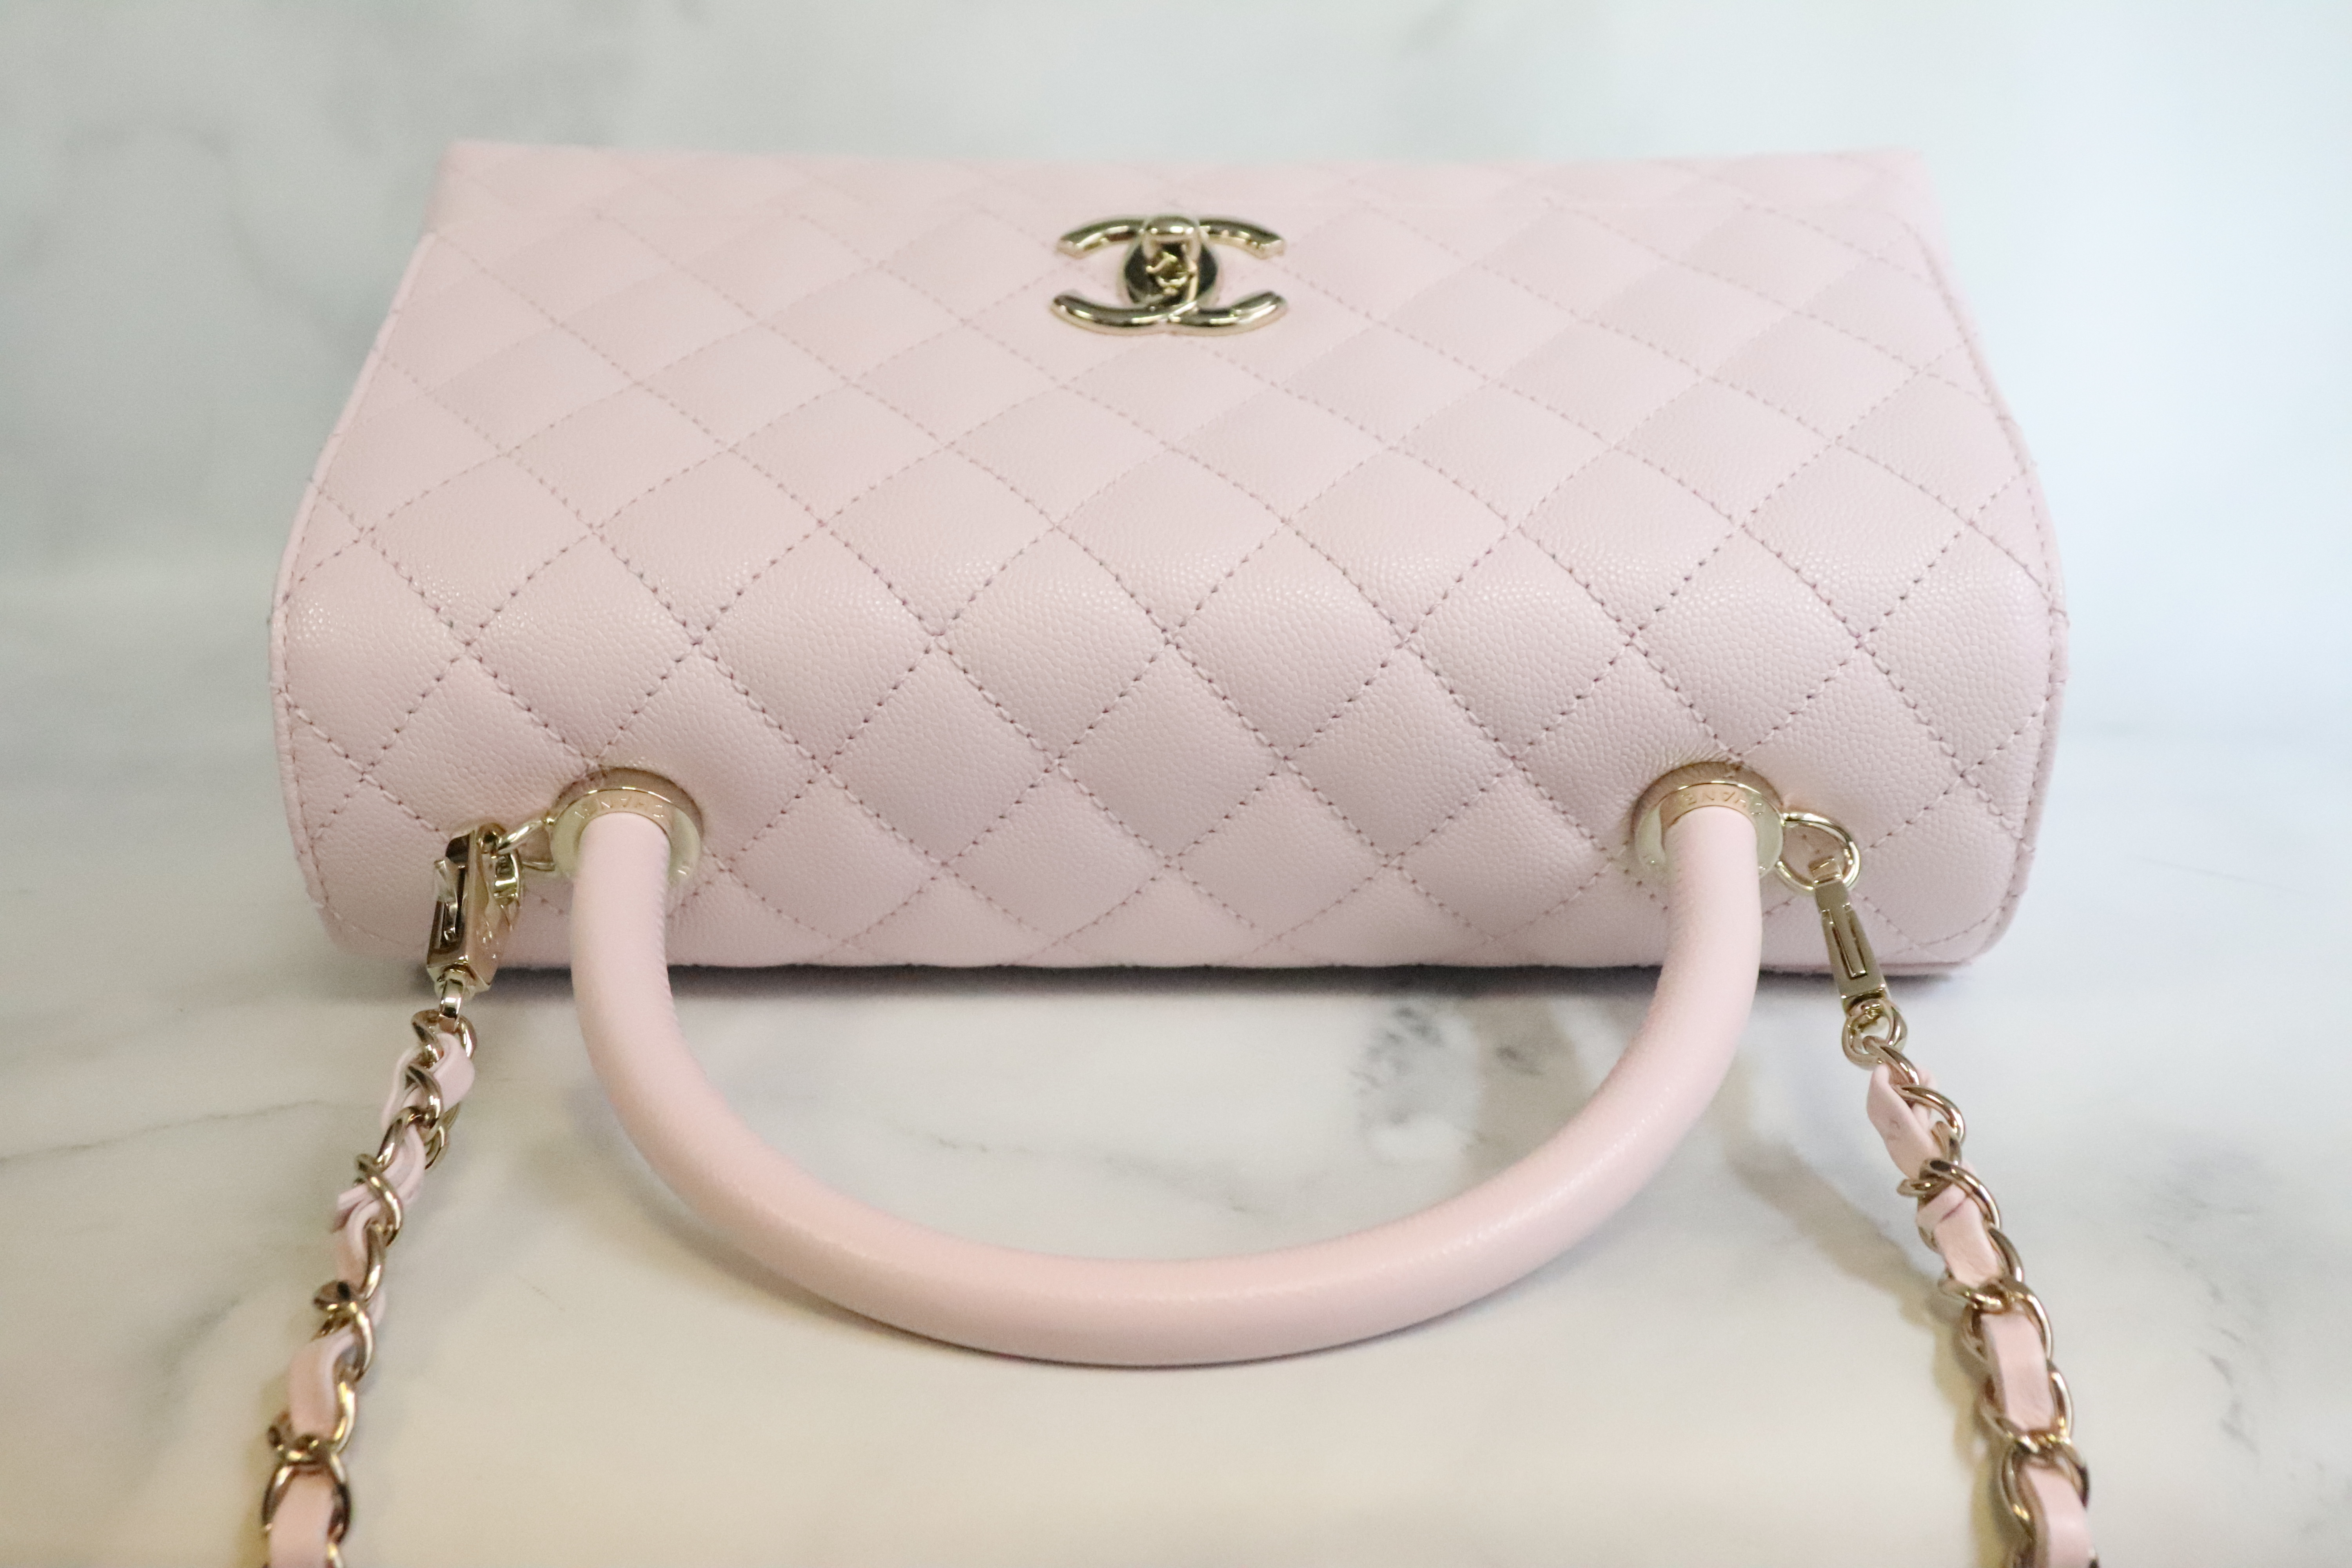 Chanel Coco Handle Medium, 22C Pink Caviar Leather, Light Gold Hardware,  New in Box